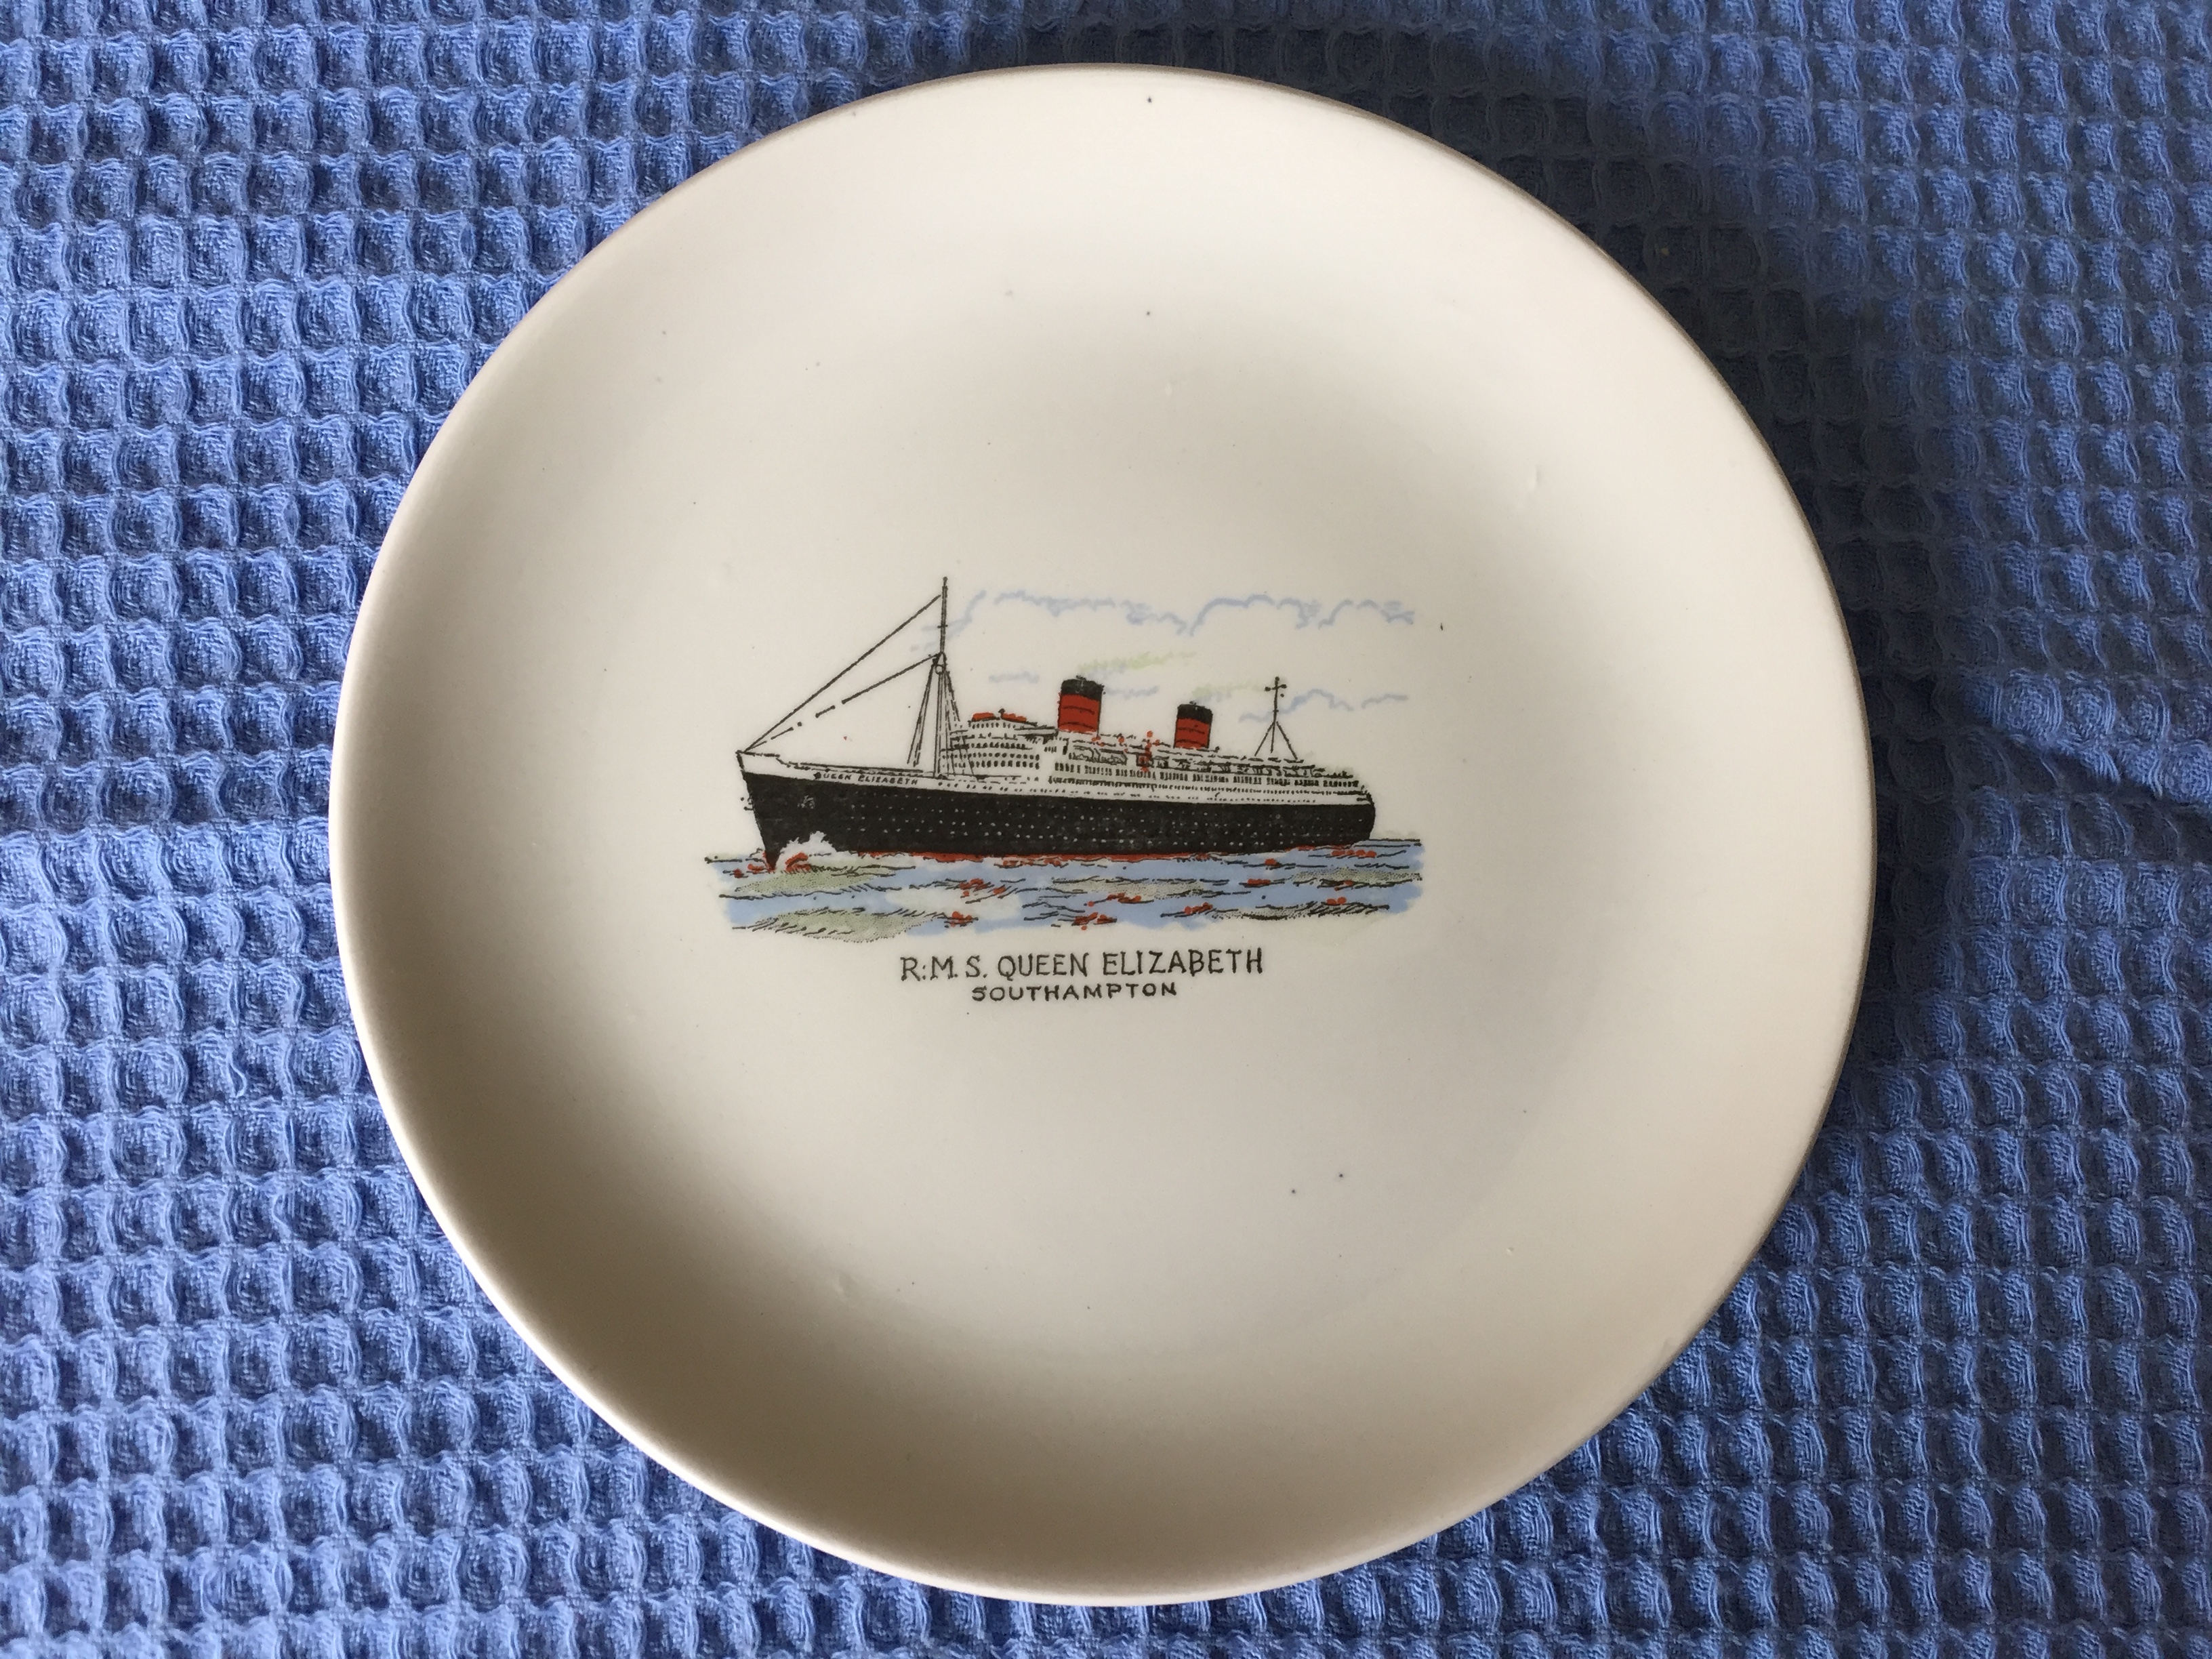 EARLY SOUVENIR PLATE FROM THE RMS QUEEN ELIZABETH